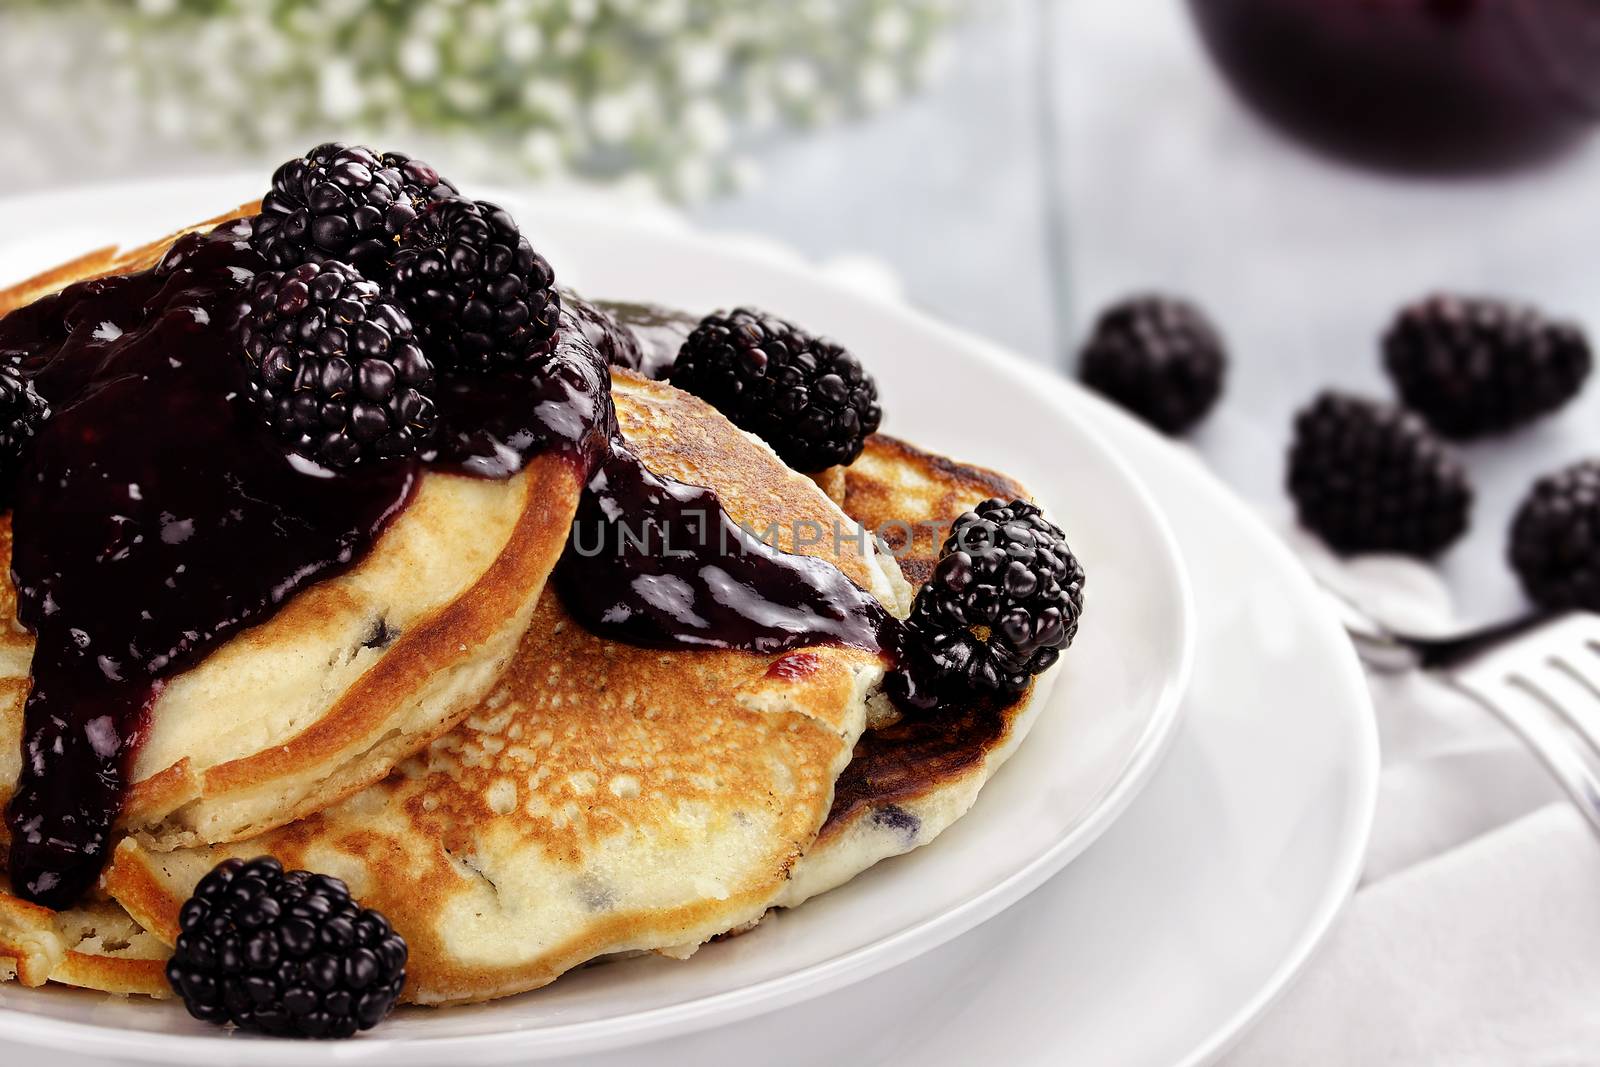 Pancakes and Blackberries by StephanieFrey